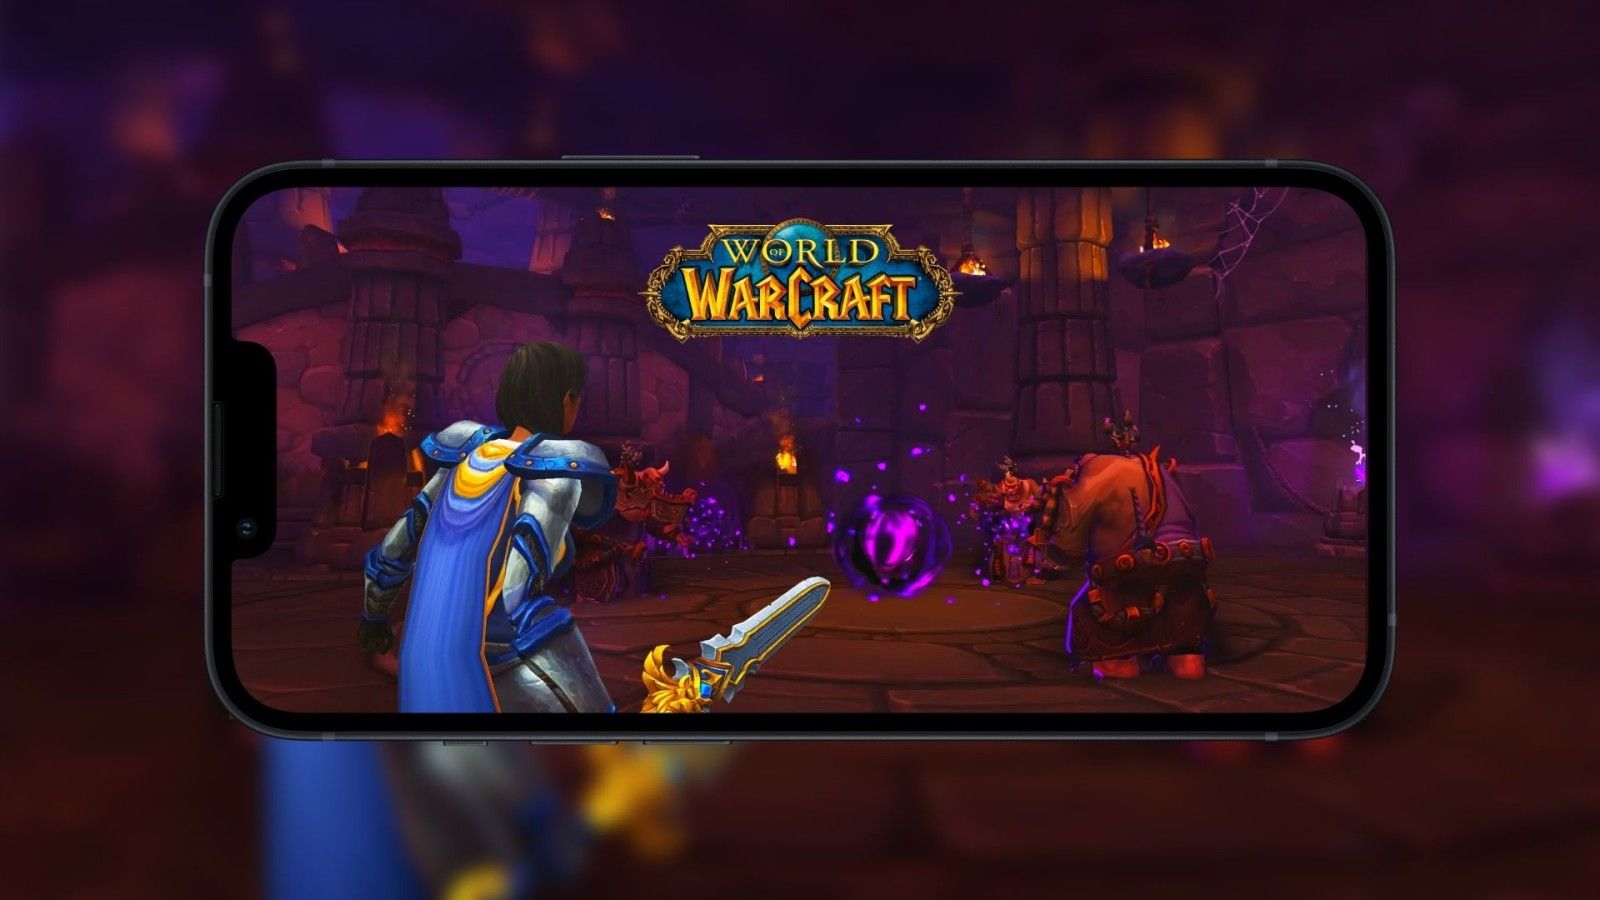 Blizzard Warcraft on mobile